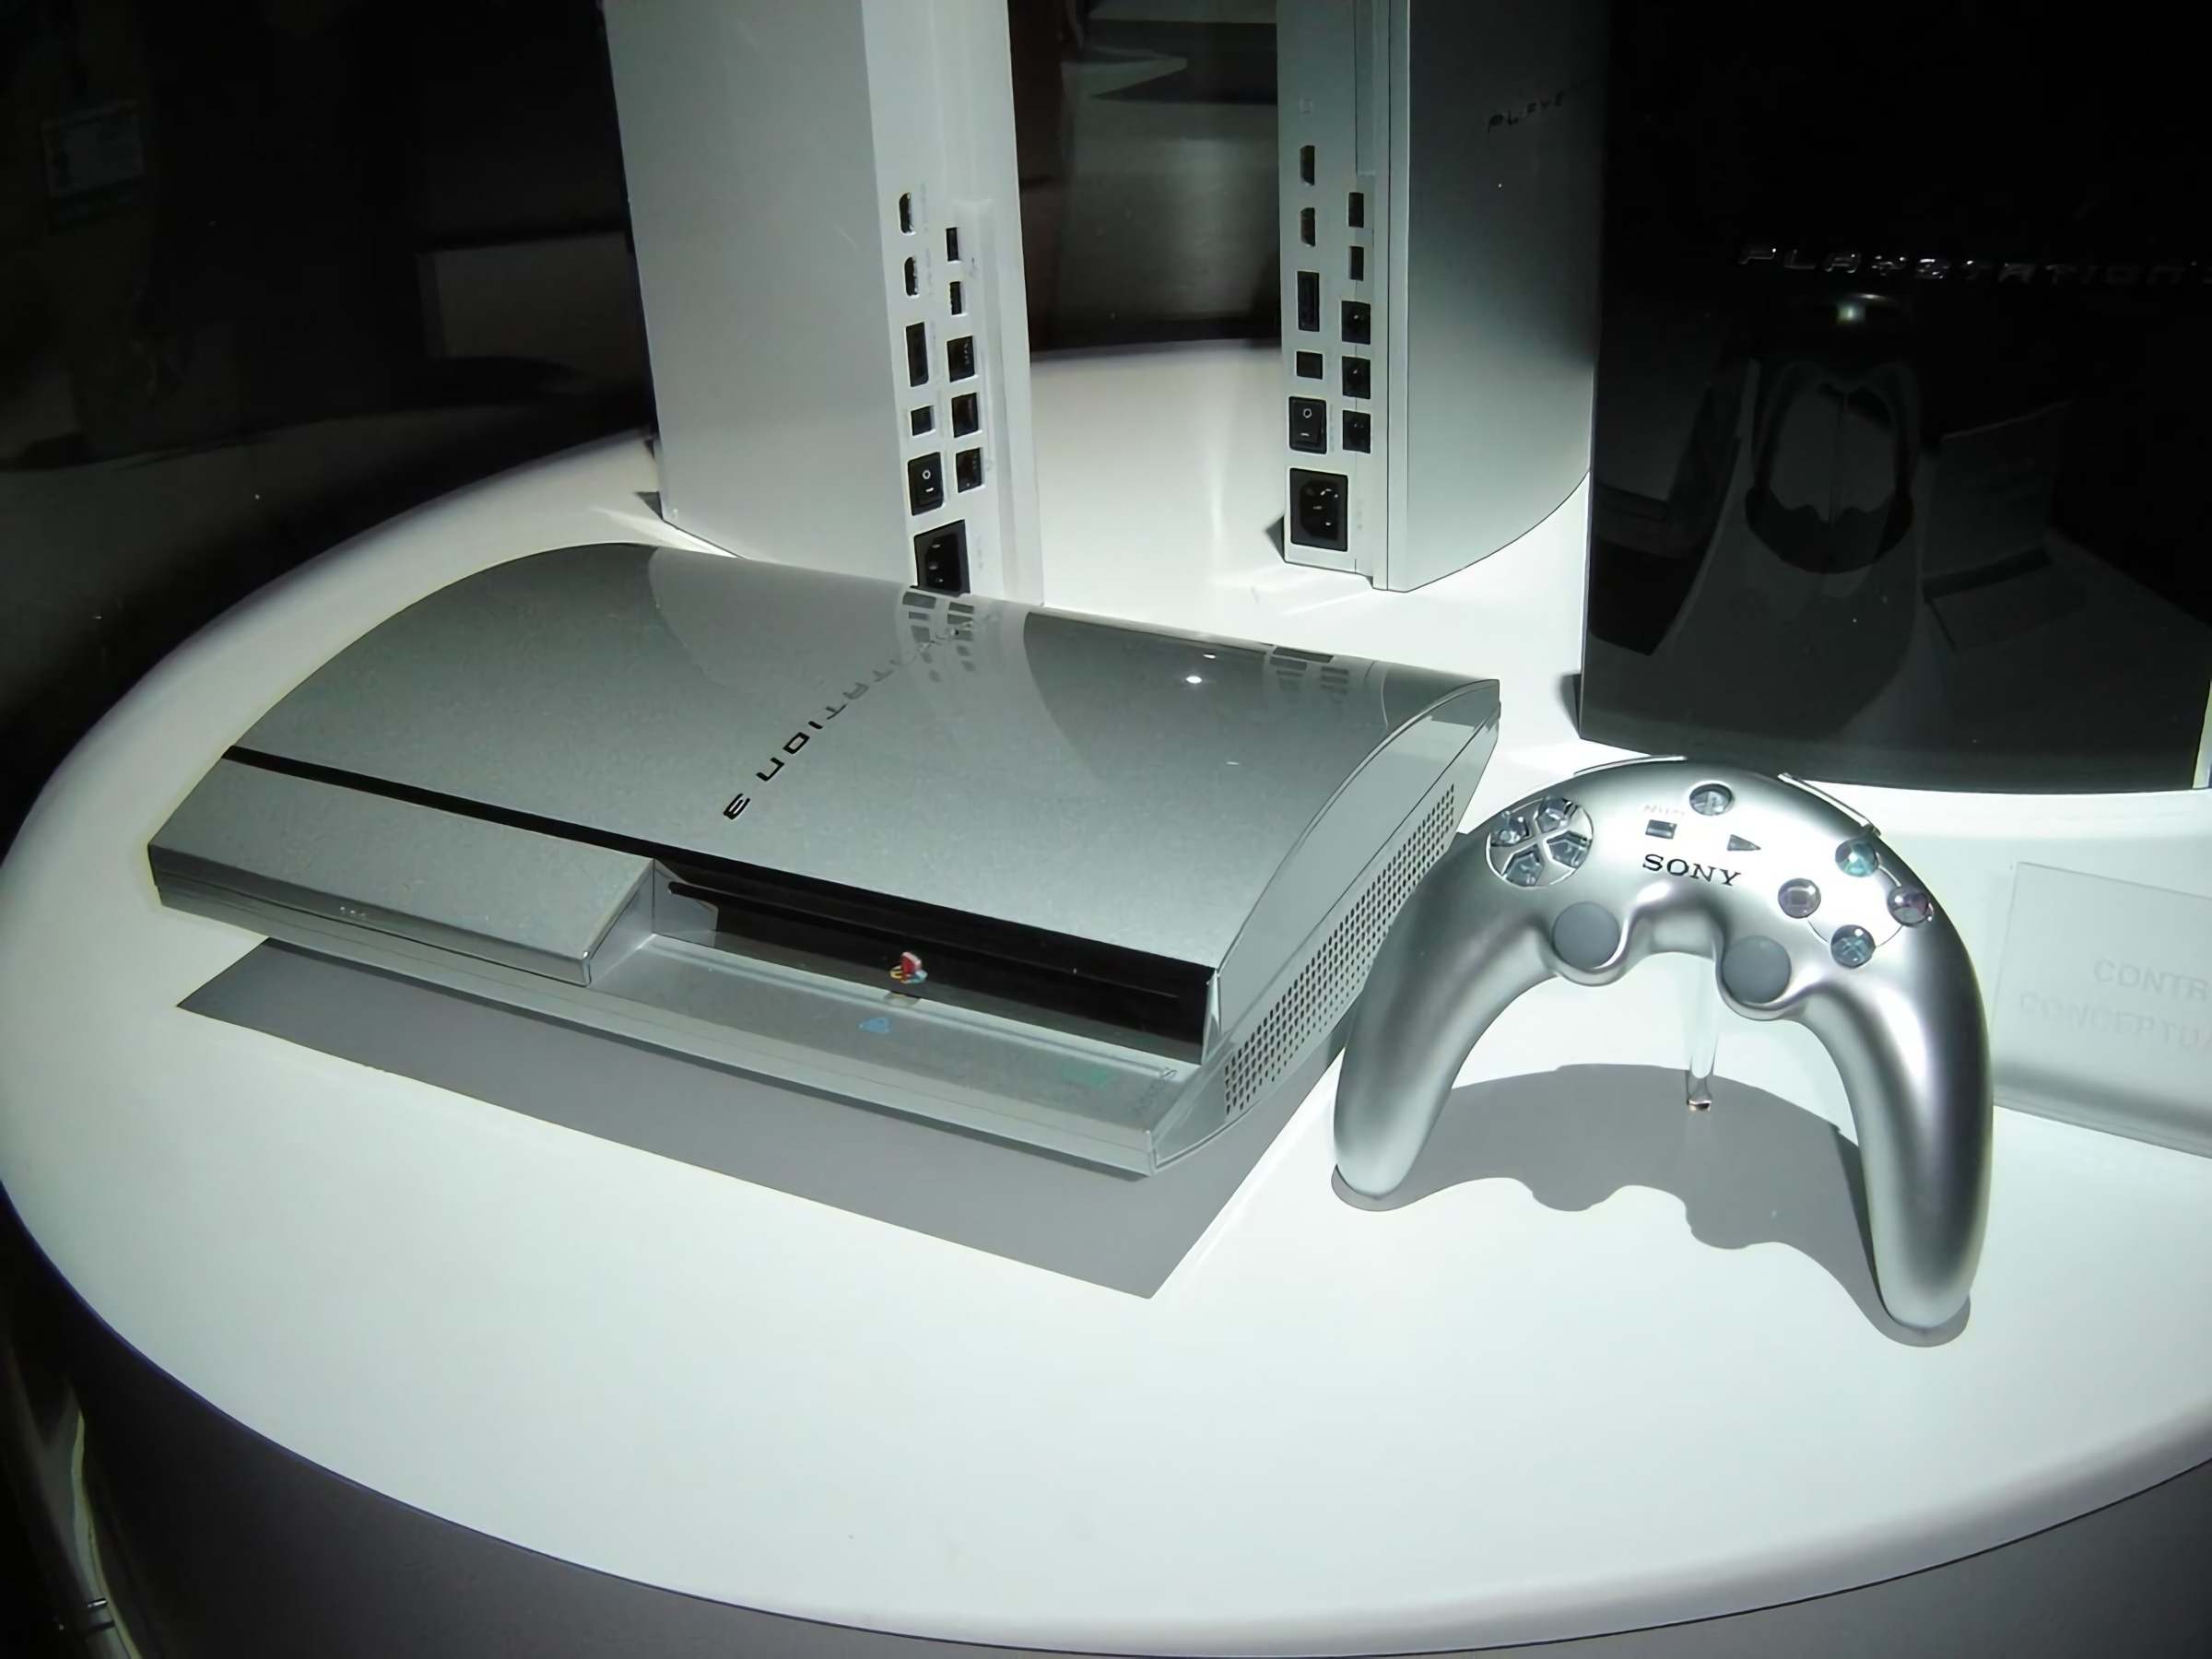 Ps3 old. Sony ps3 Silver. PLAYSTATION 3 Console Prototype. Sony ps1 DEVKIT. Ps3 контроллер Бумеранг.